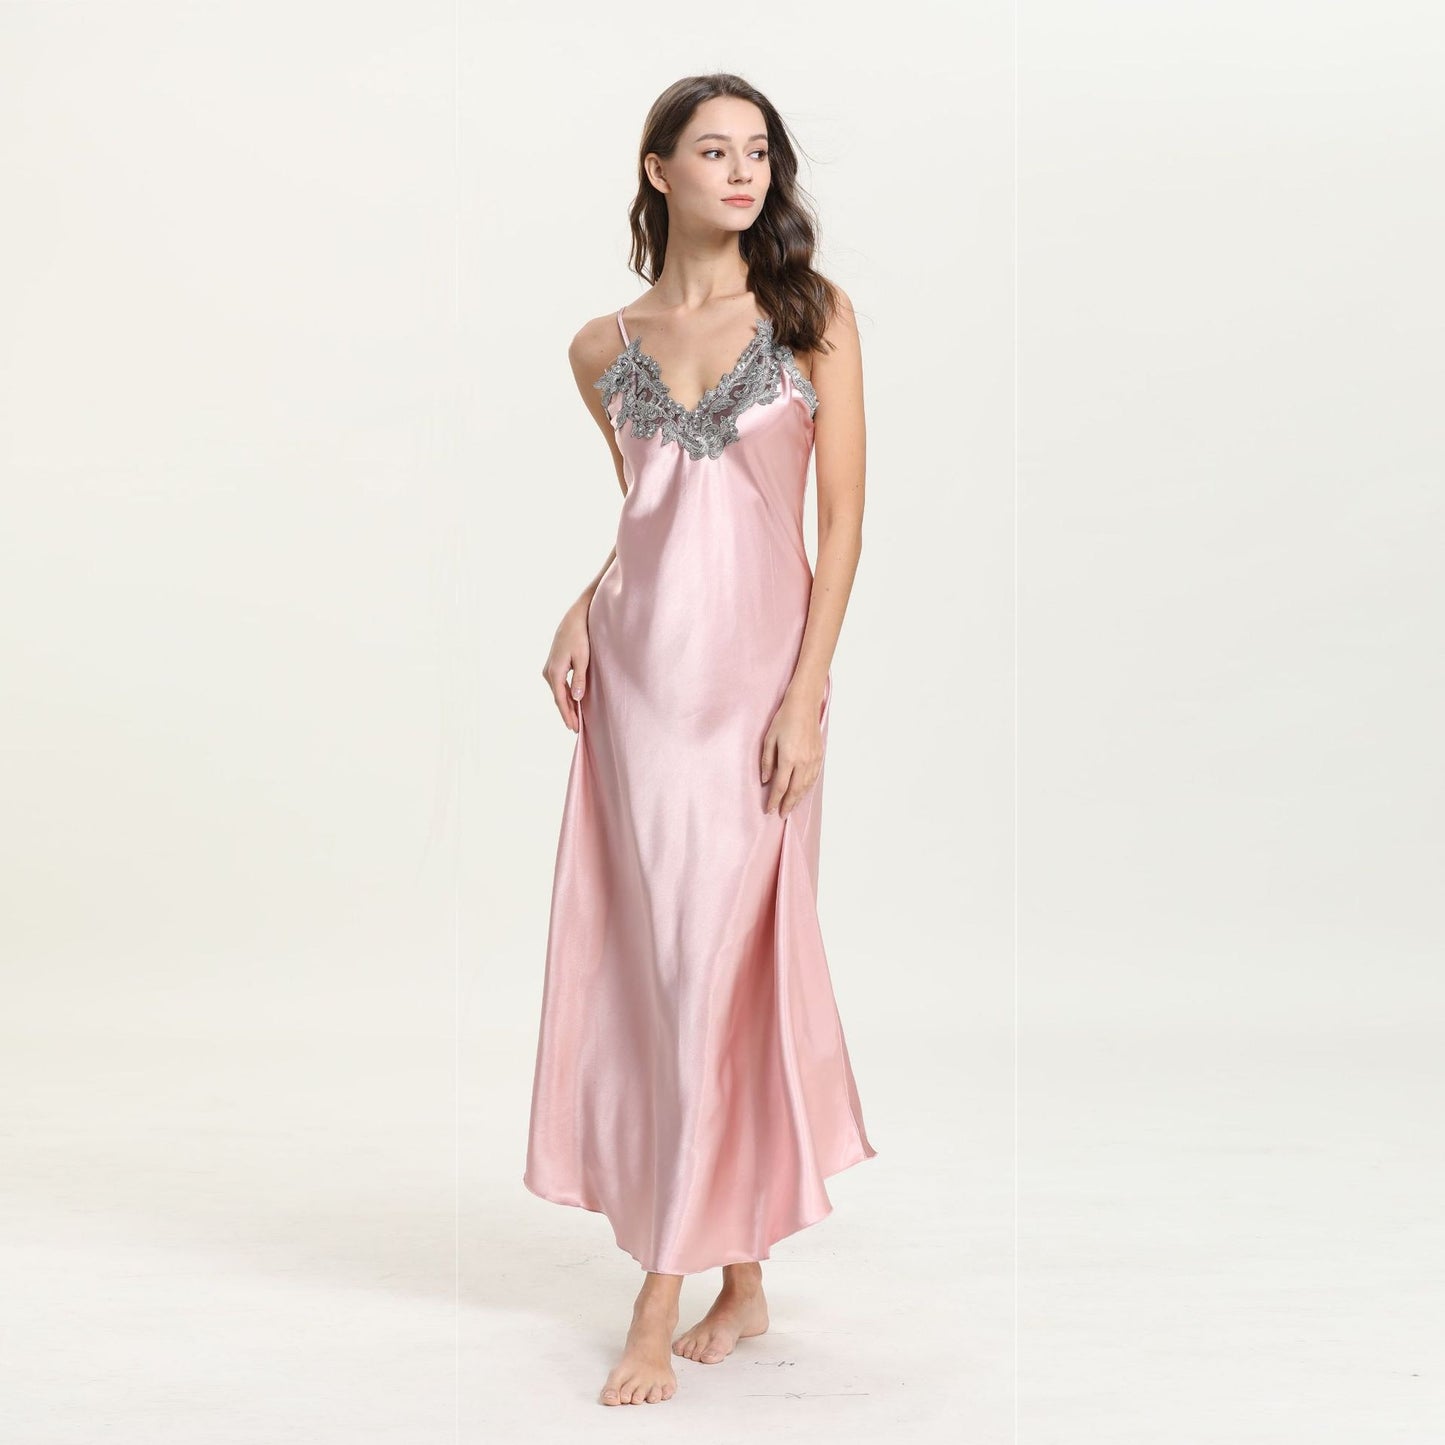 Long Chemise Lace Satin Nightgown